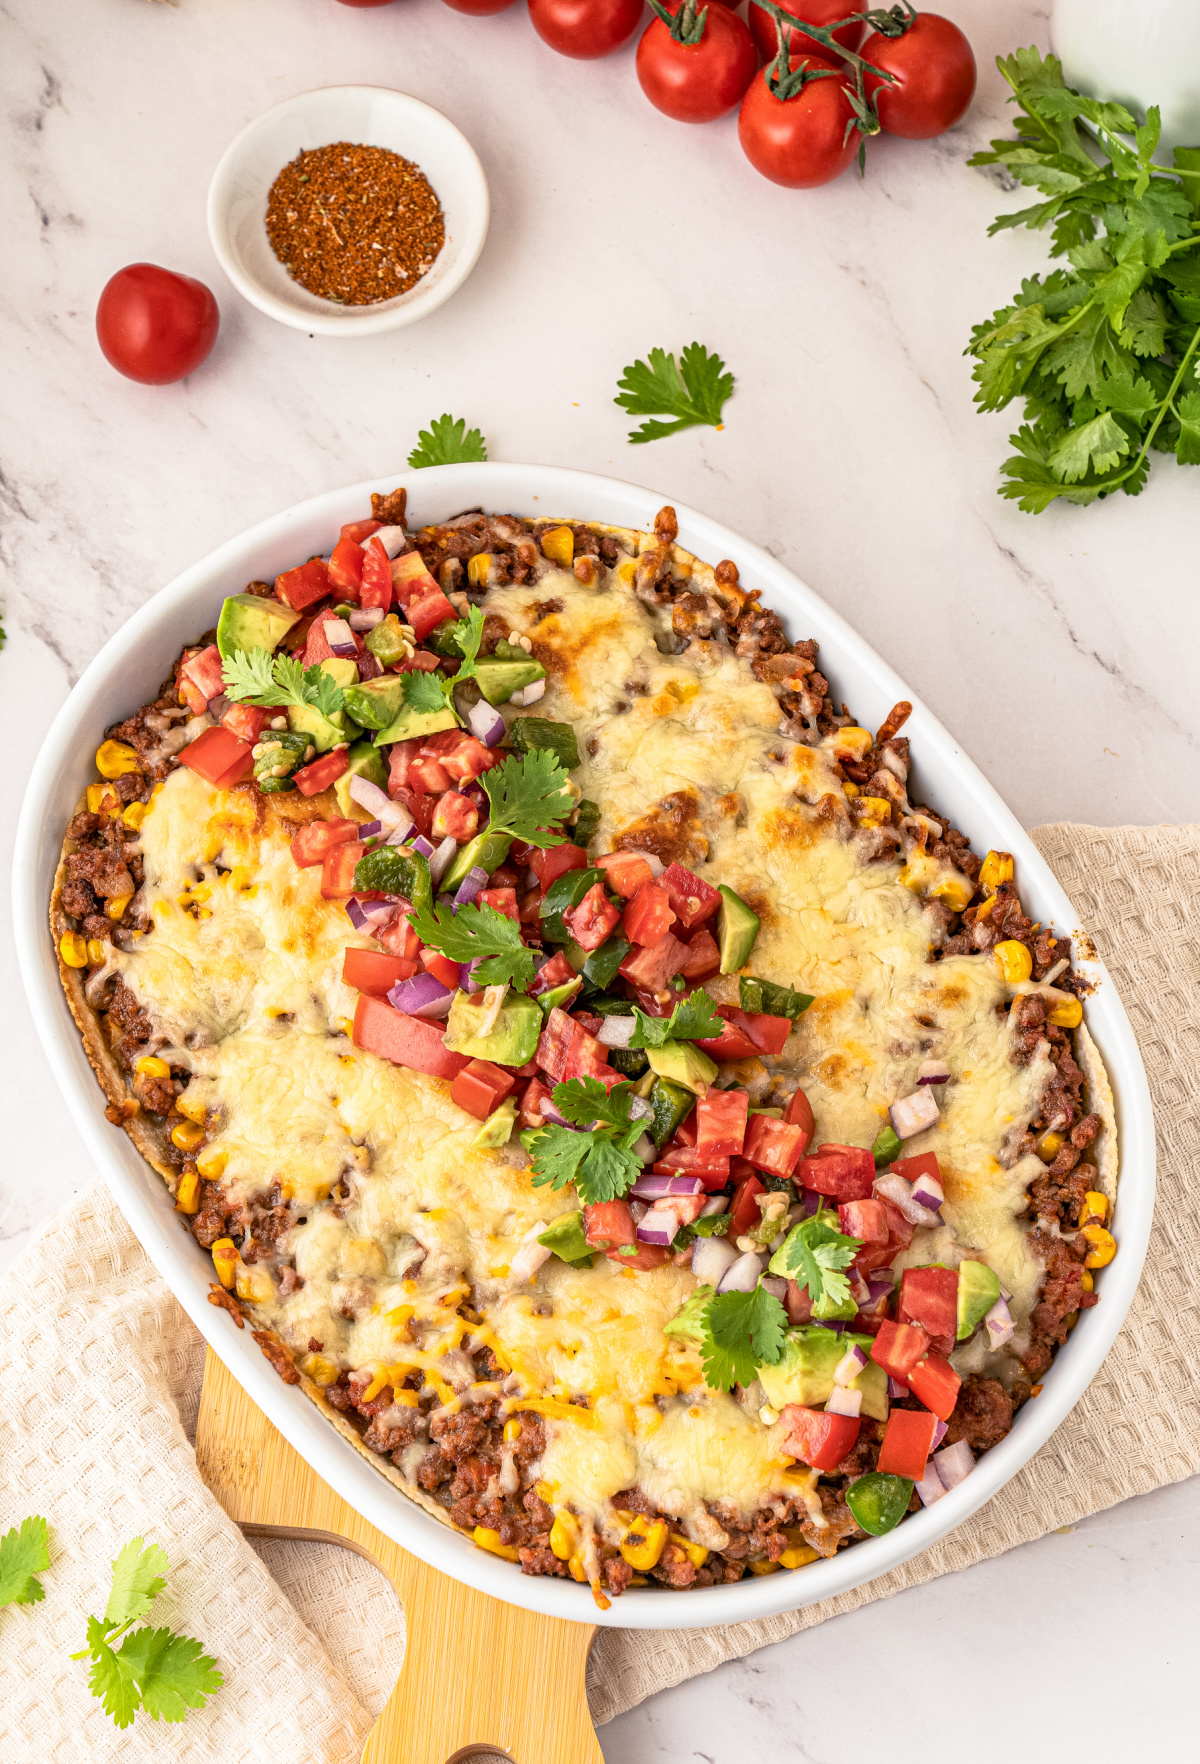 Layered Mexican Taco Lasagna Casserole with ground beef, beans, tomatoes and cheese